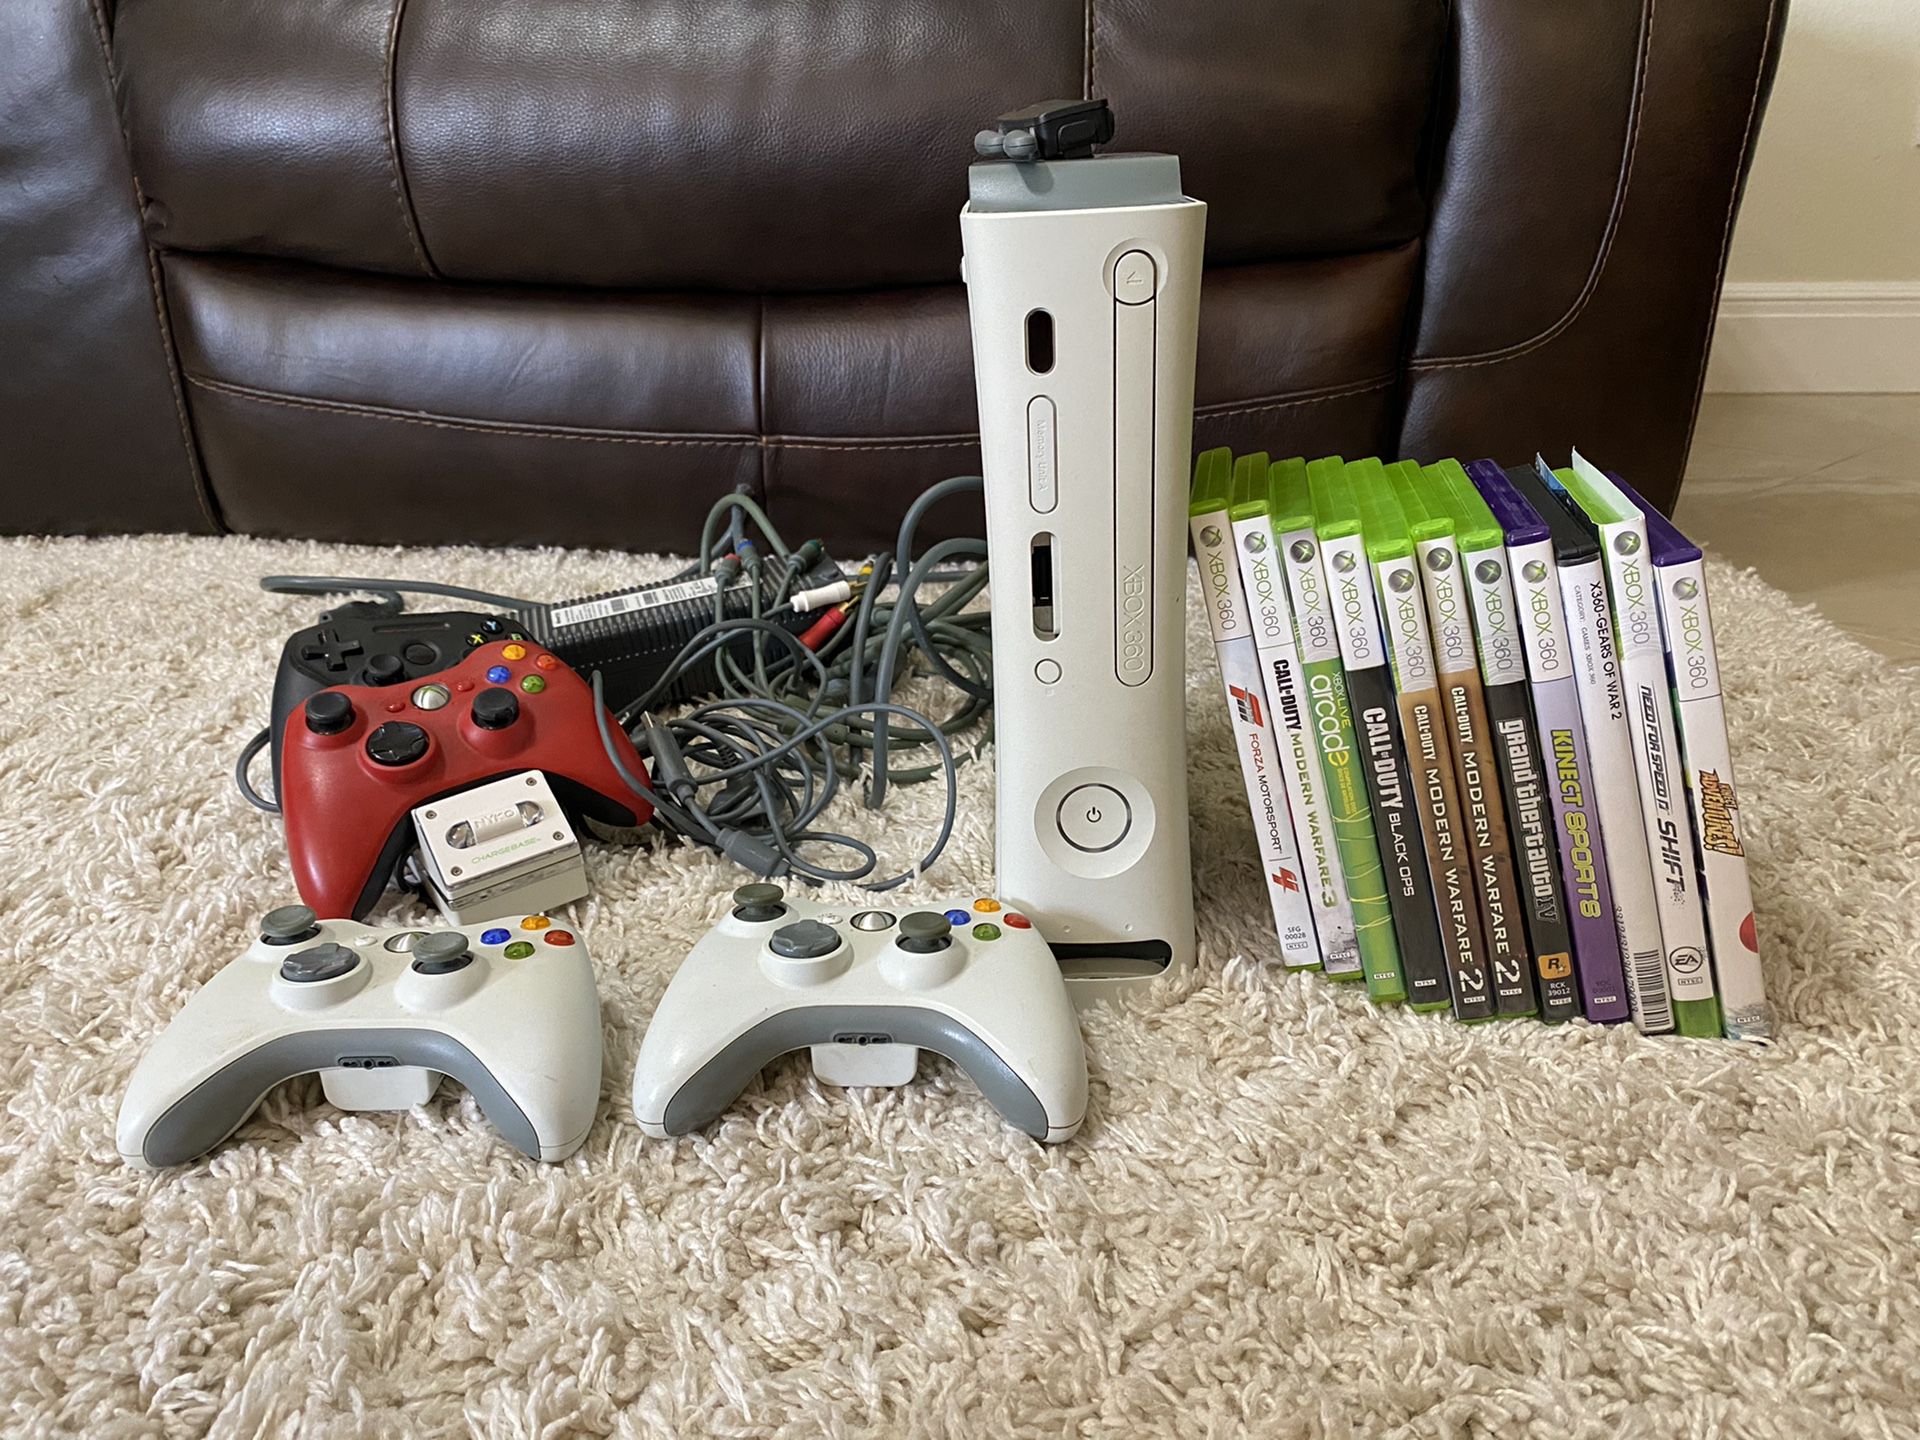 XBOX 360 with games, wireless network adaptor, controllers, and chargers